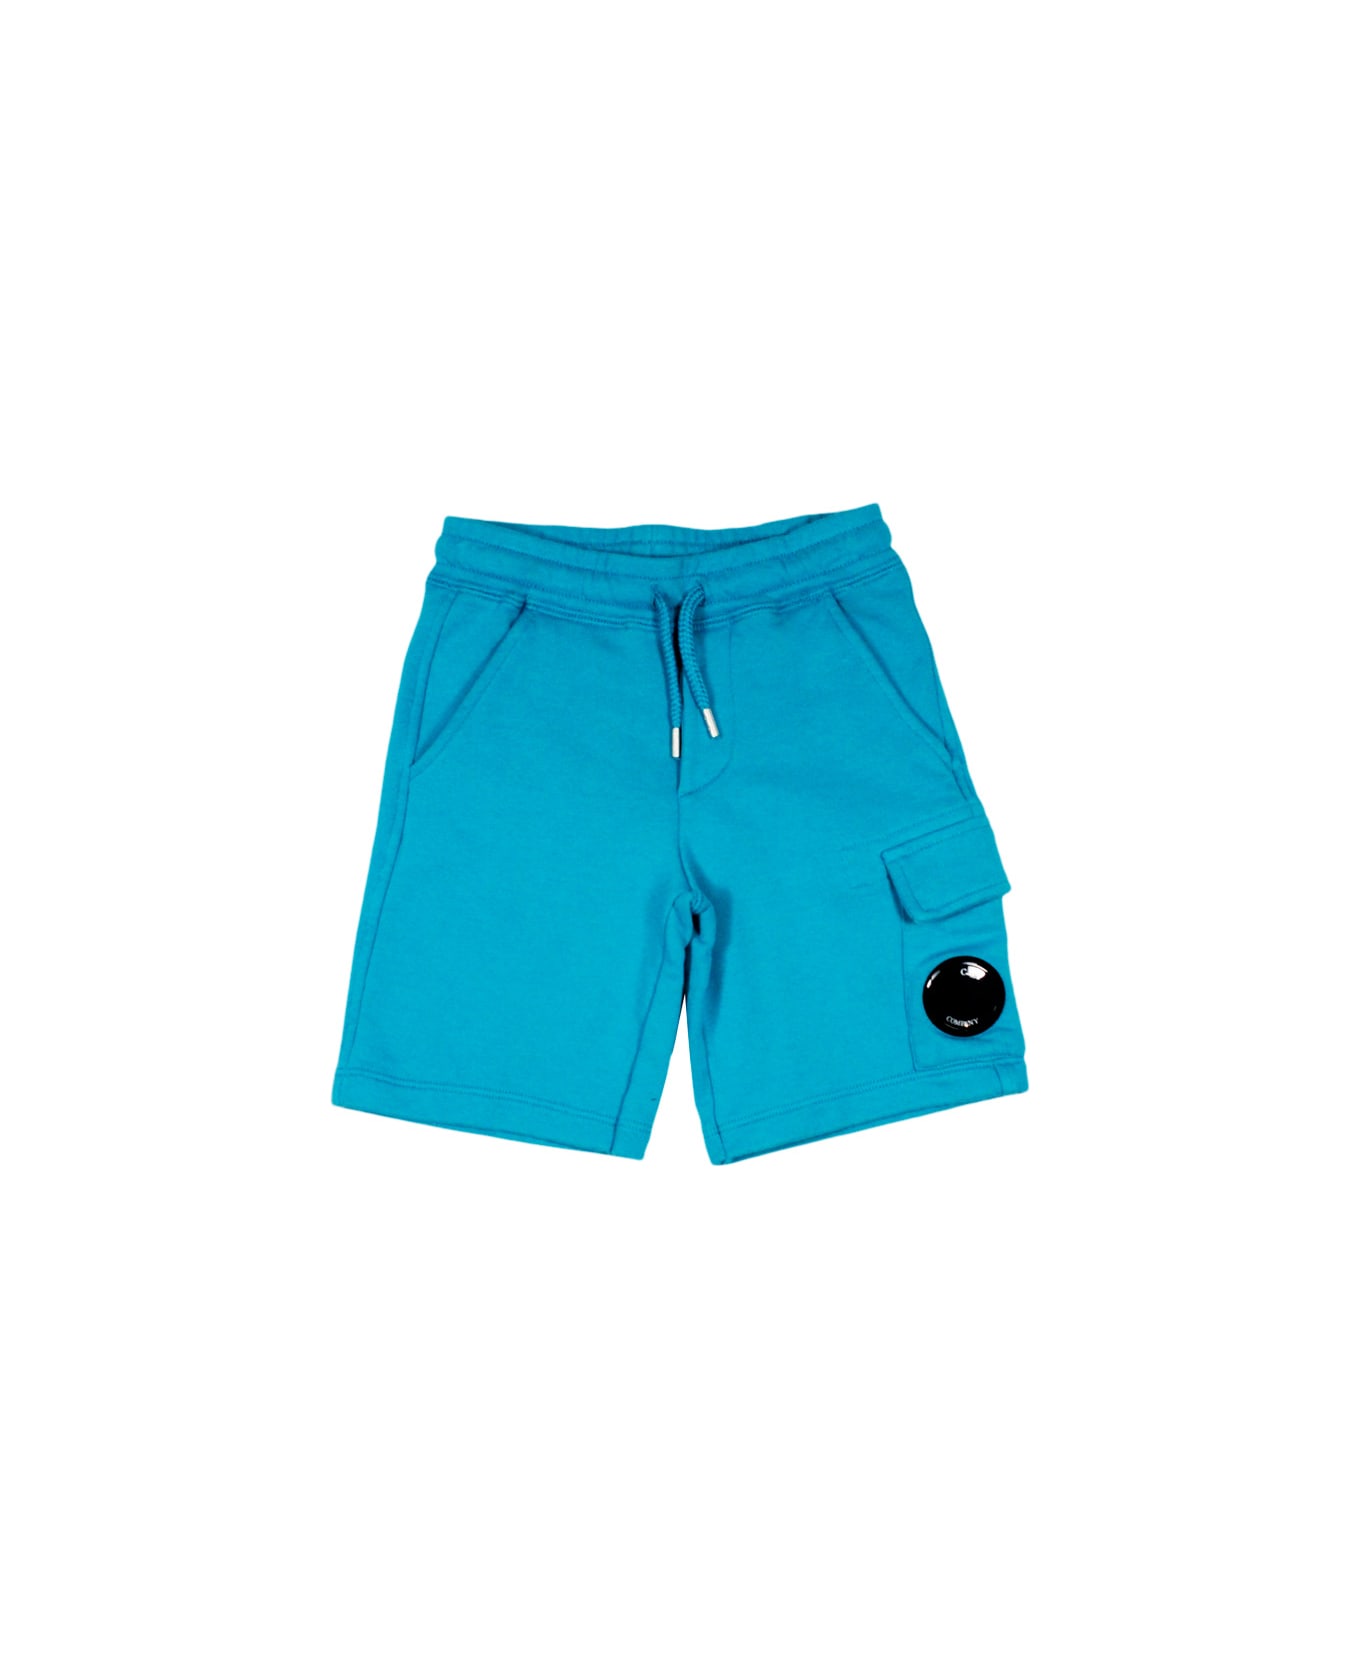 C.P. Company Bermuda Shorts In Cotton Fleece With Drawstring At The Waist And Pocket With Lens On The Leg - Blu royal